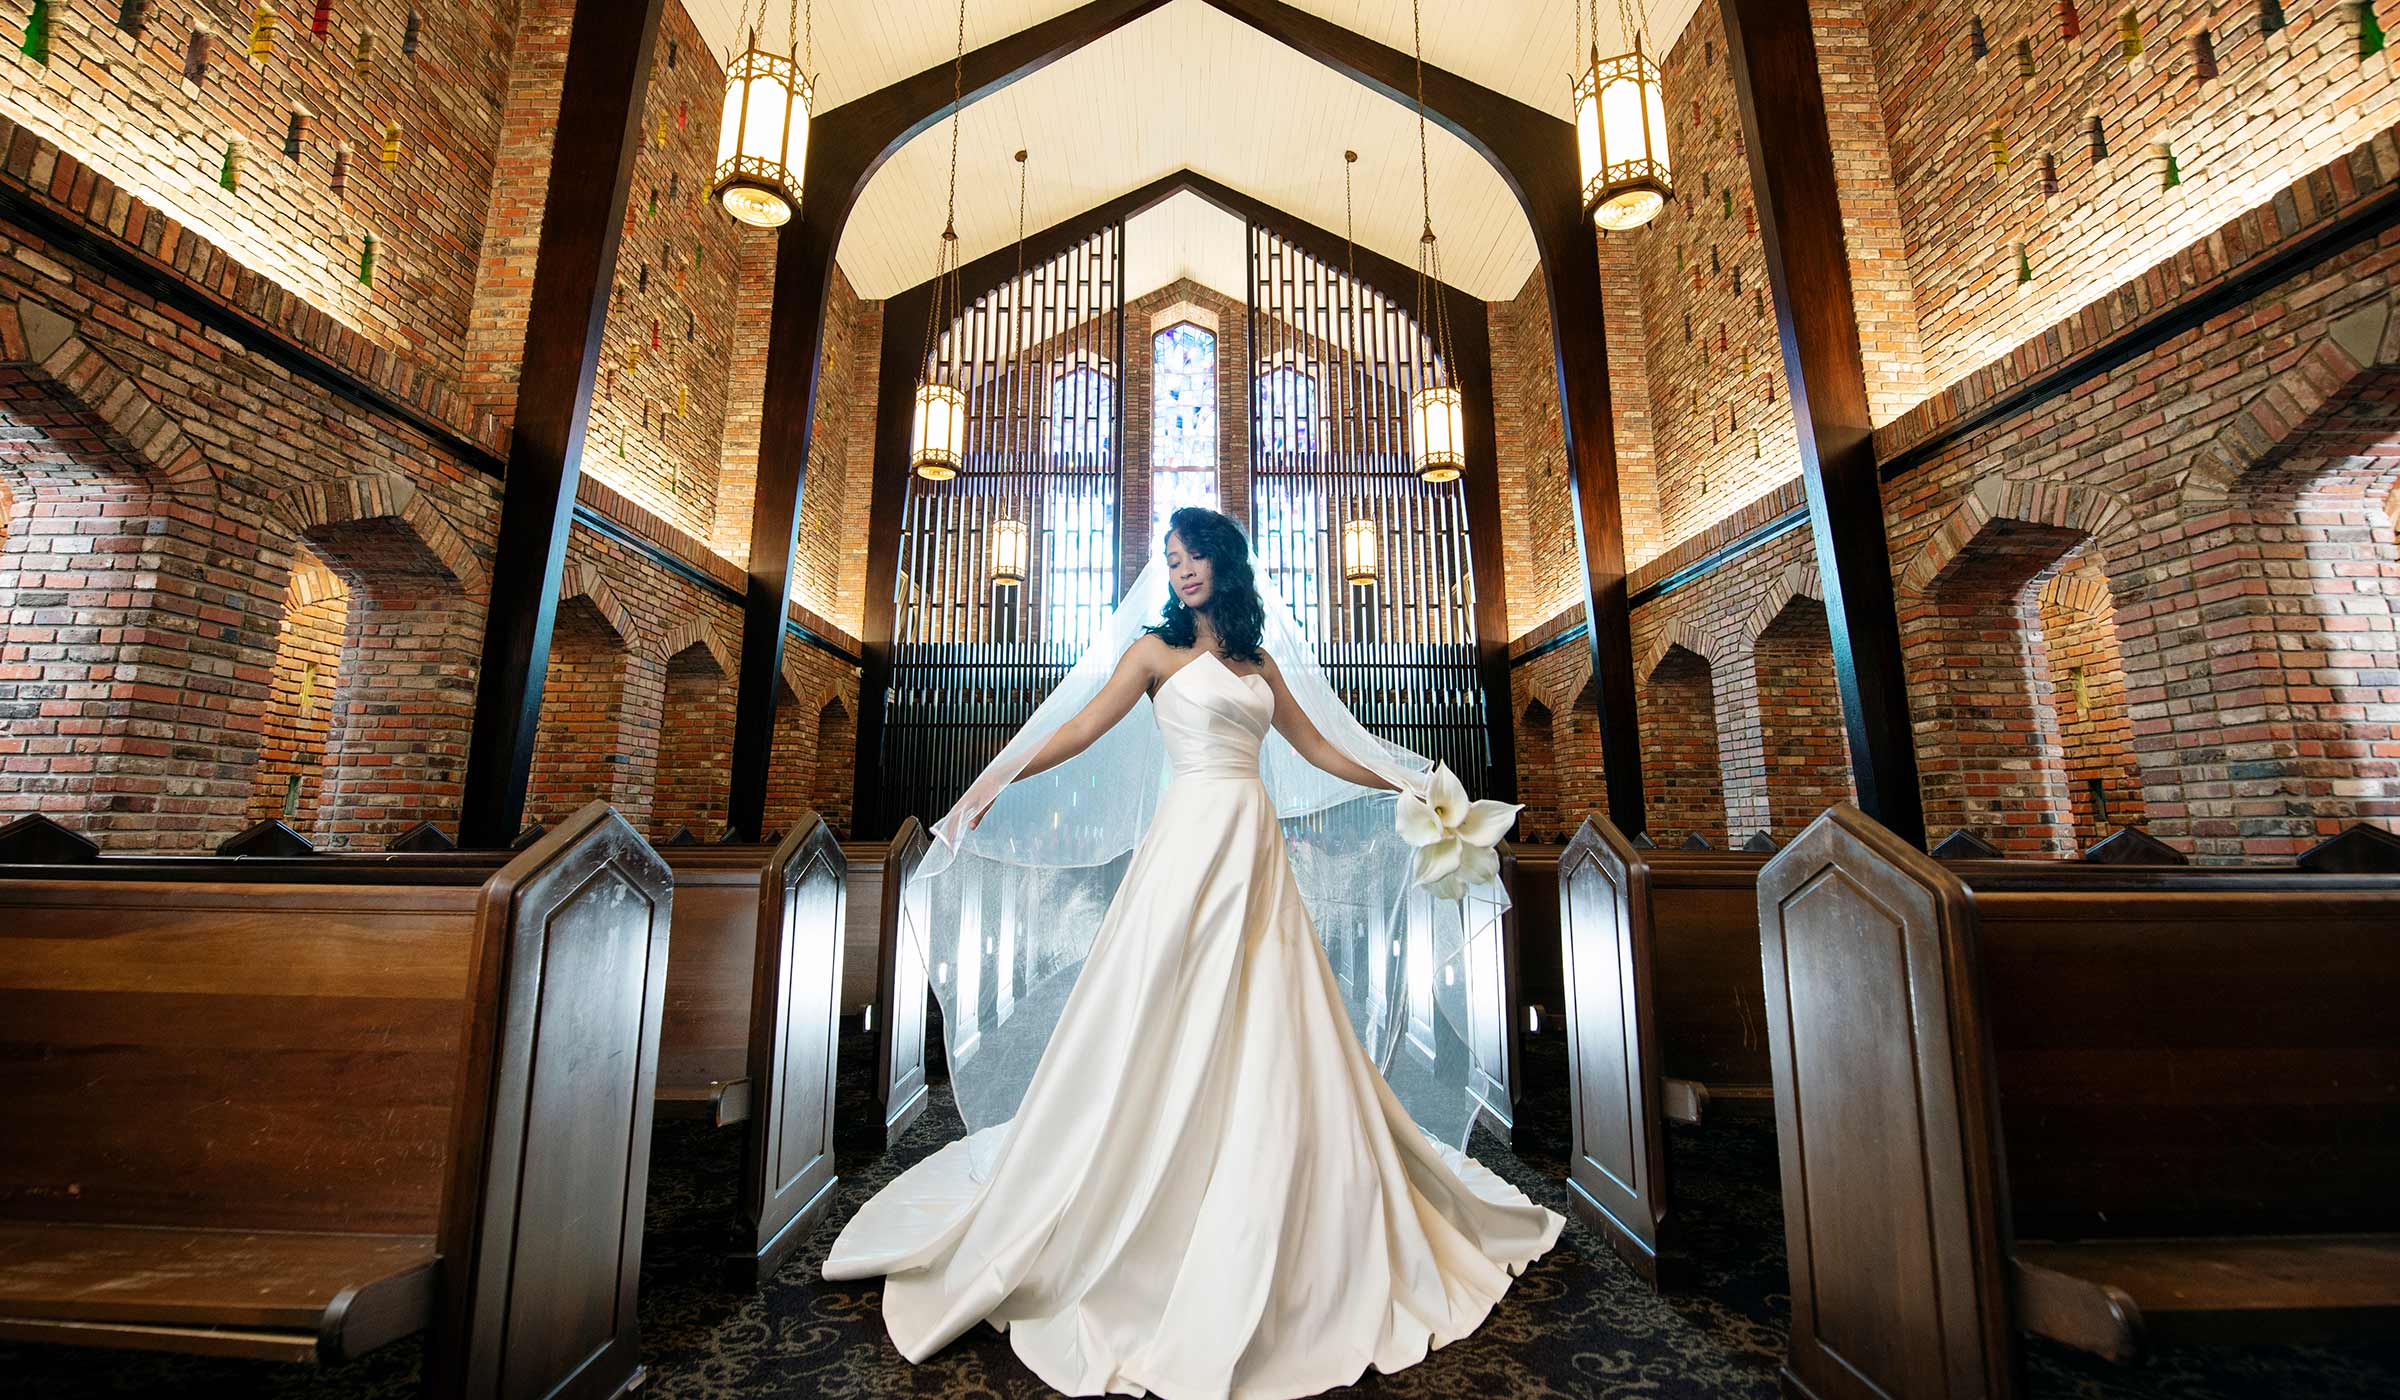 Bride in white gown twirling in wooden and brick chapel with stained glass in background